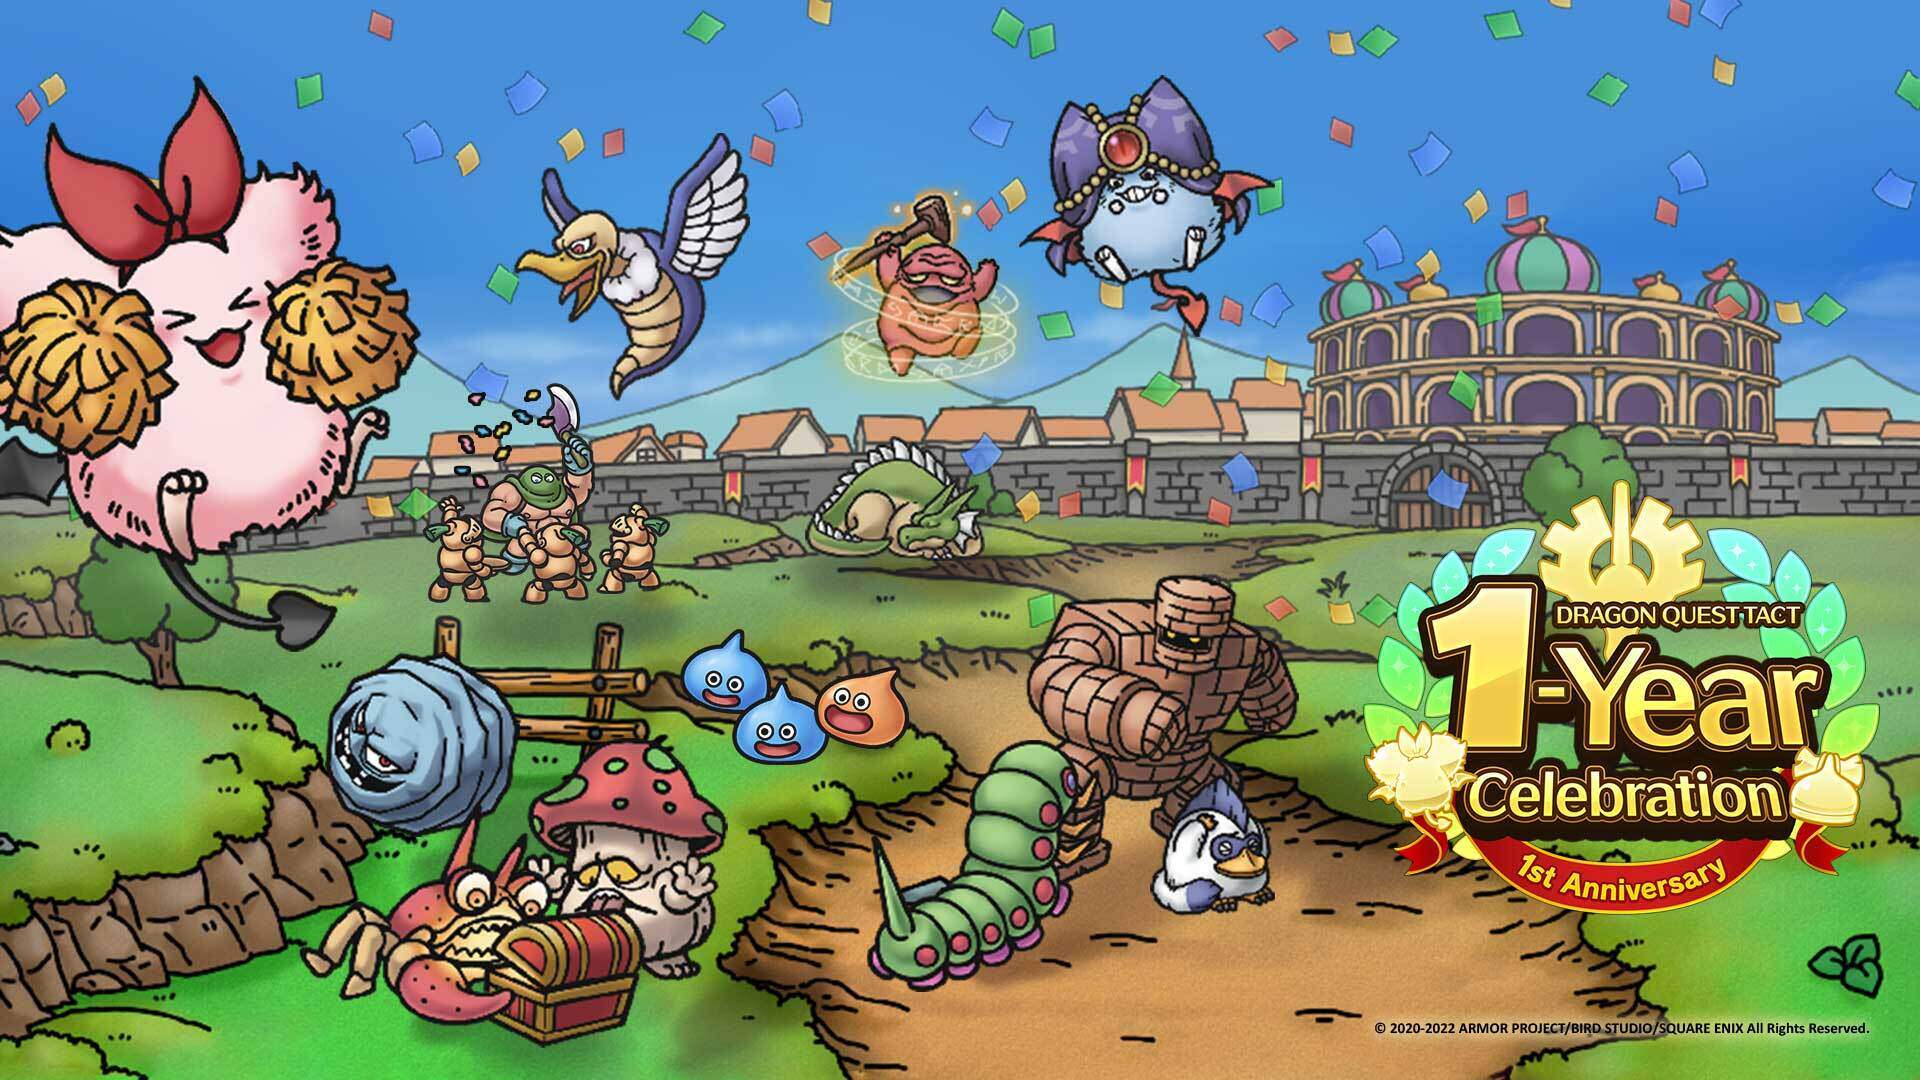 DRAGON QUEST TACT monsters celebrating for 1-Year Anniversary 